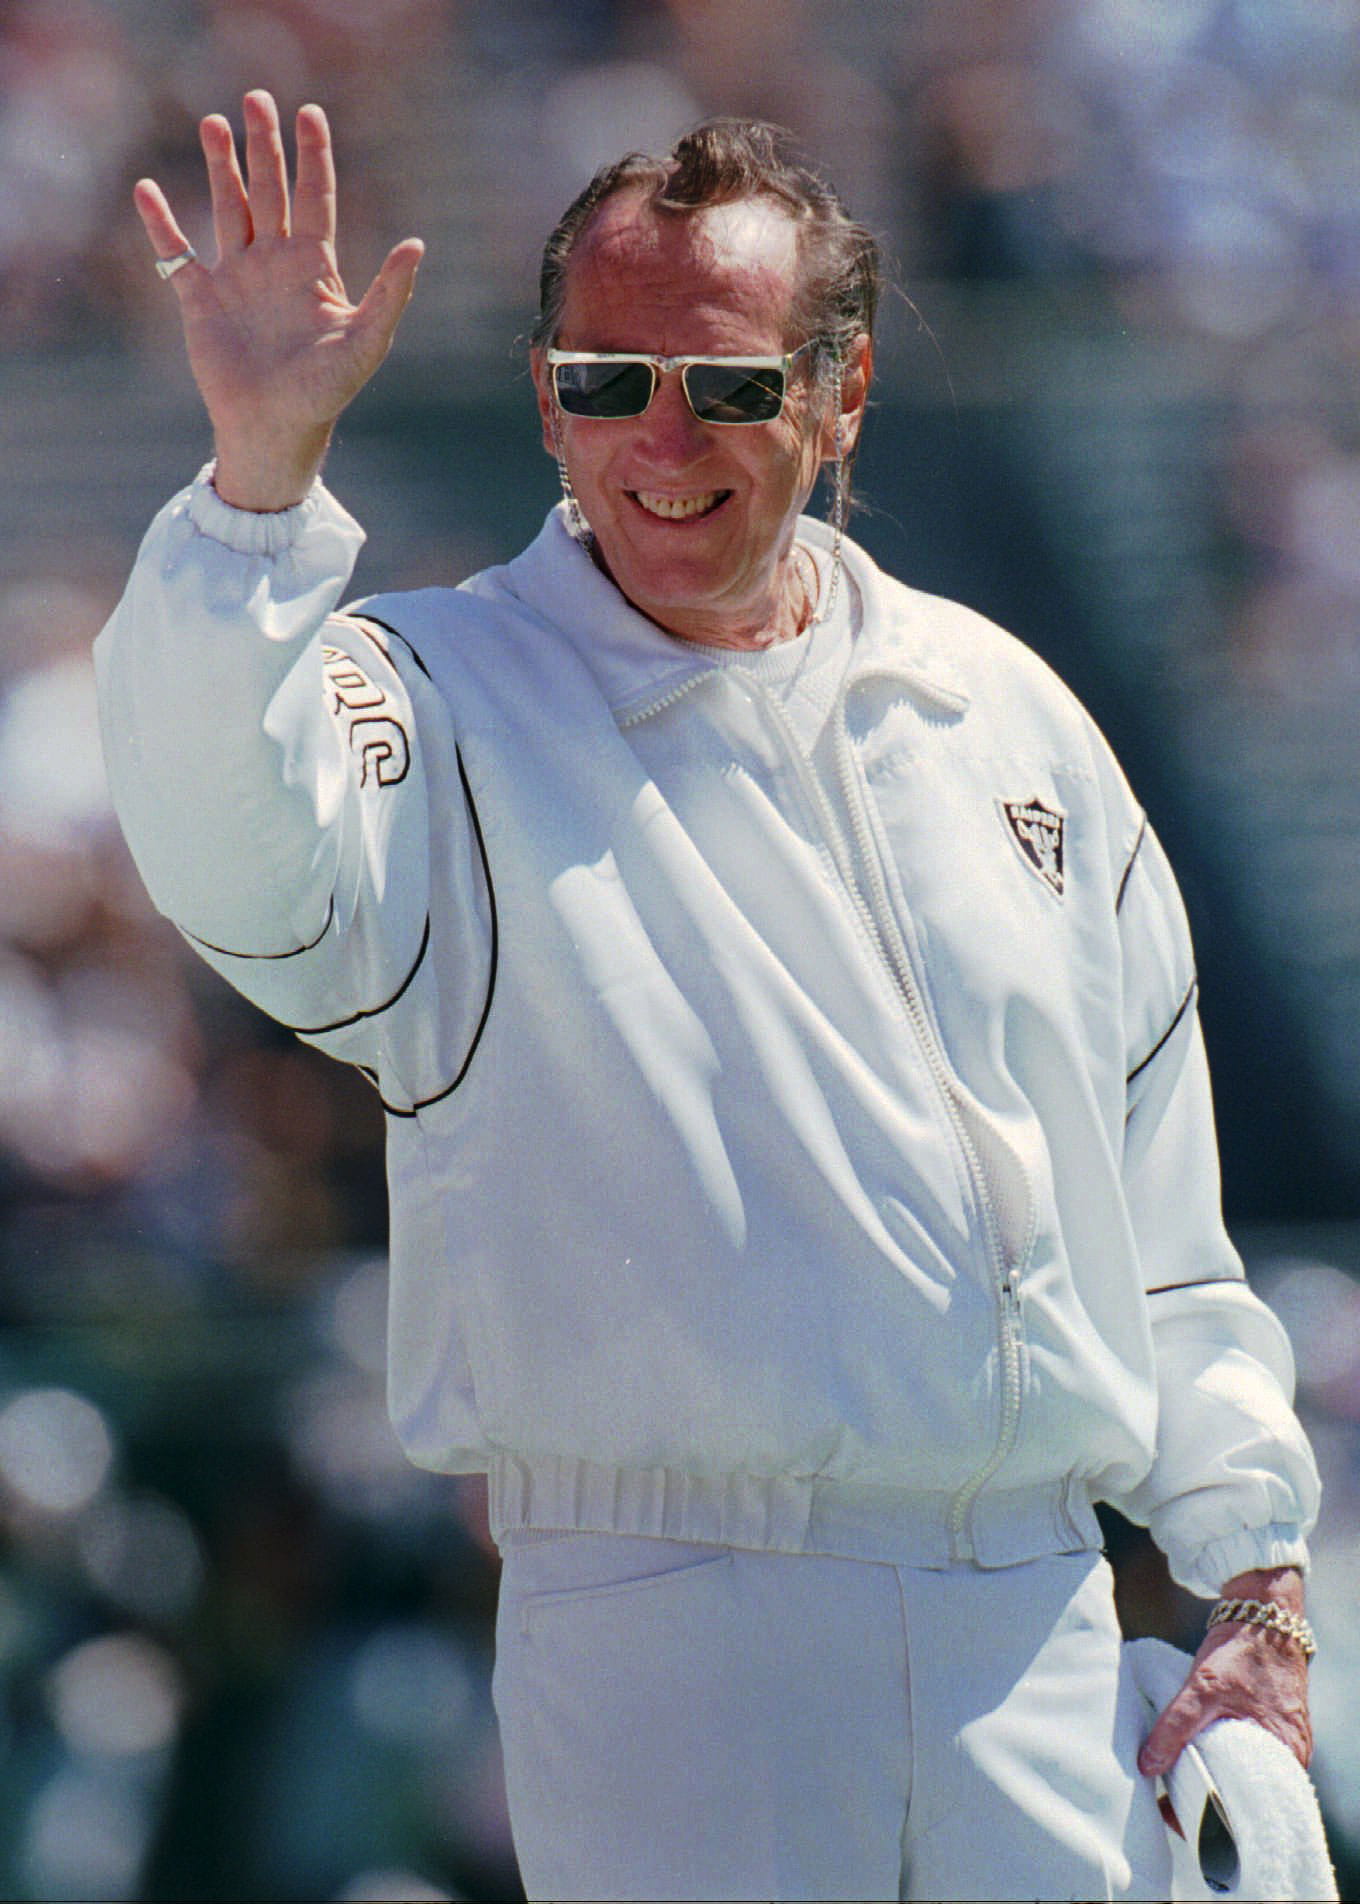 Raiders owner Al Davis relocated the Raiders from Los Angeles back to Oakland in 1995.